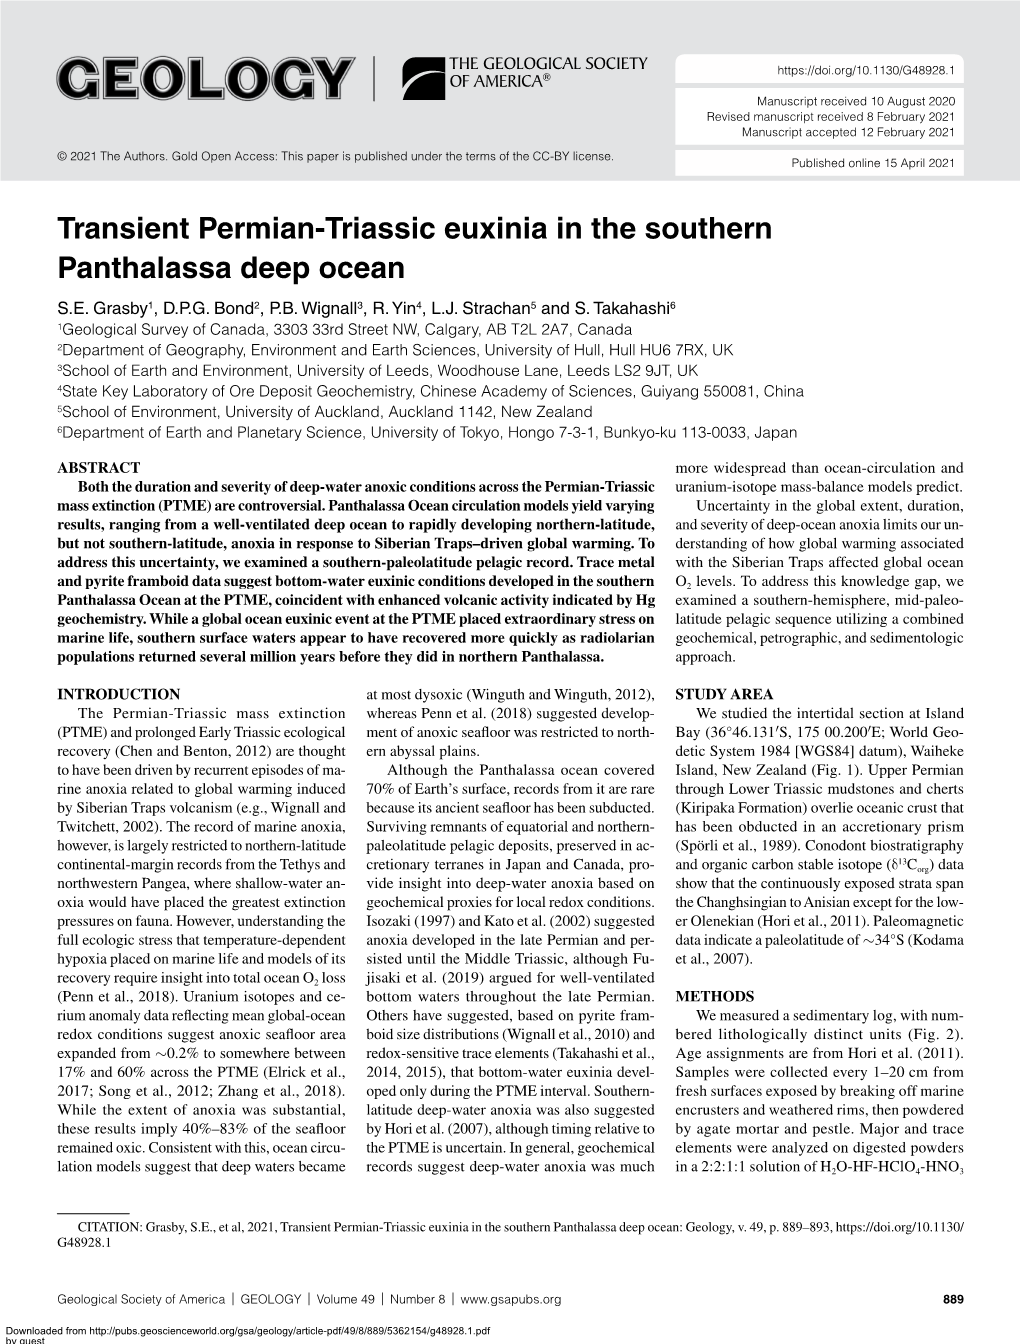 Transient Permian-Triassic Euxinia in the Southern Panthalassa Deep Ocean S.E